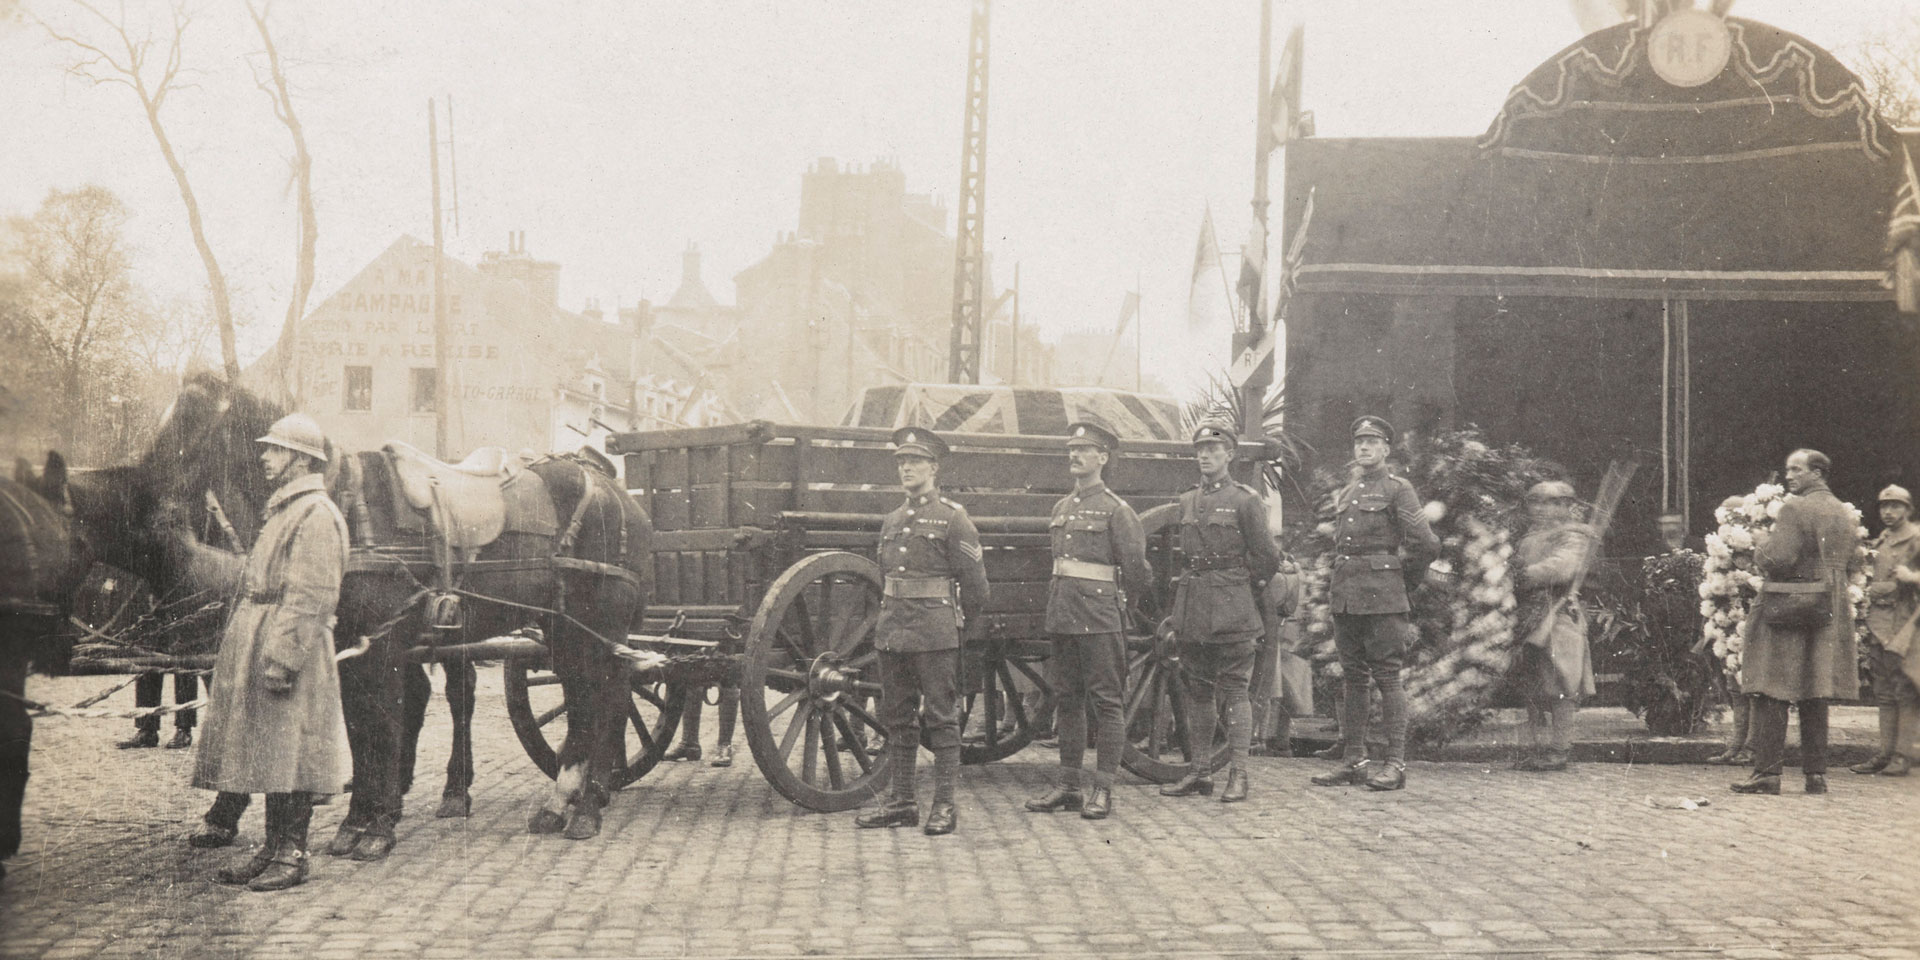 Coffin of the Unknown Warrior borne in a wagon with a guard of Allied soldiers, 10 November 1920